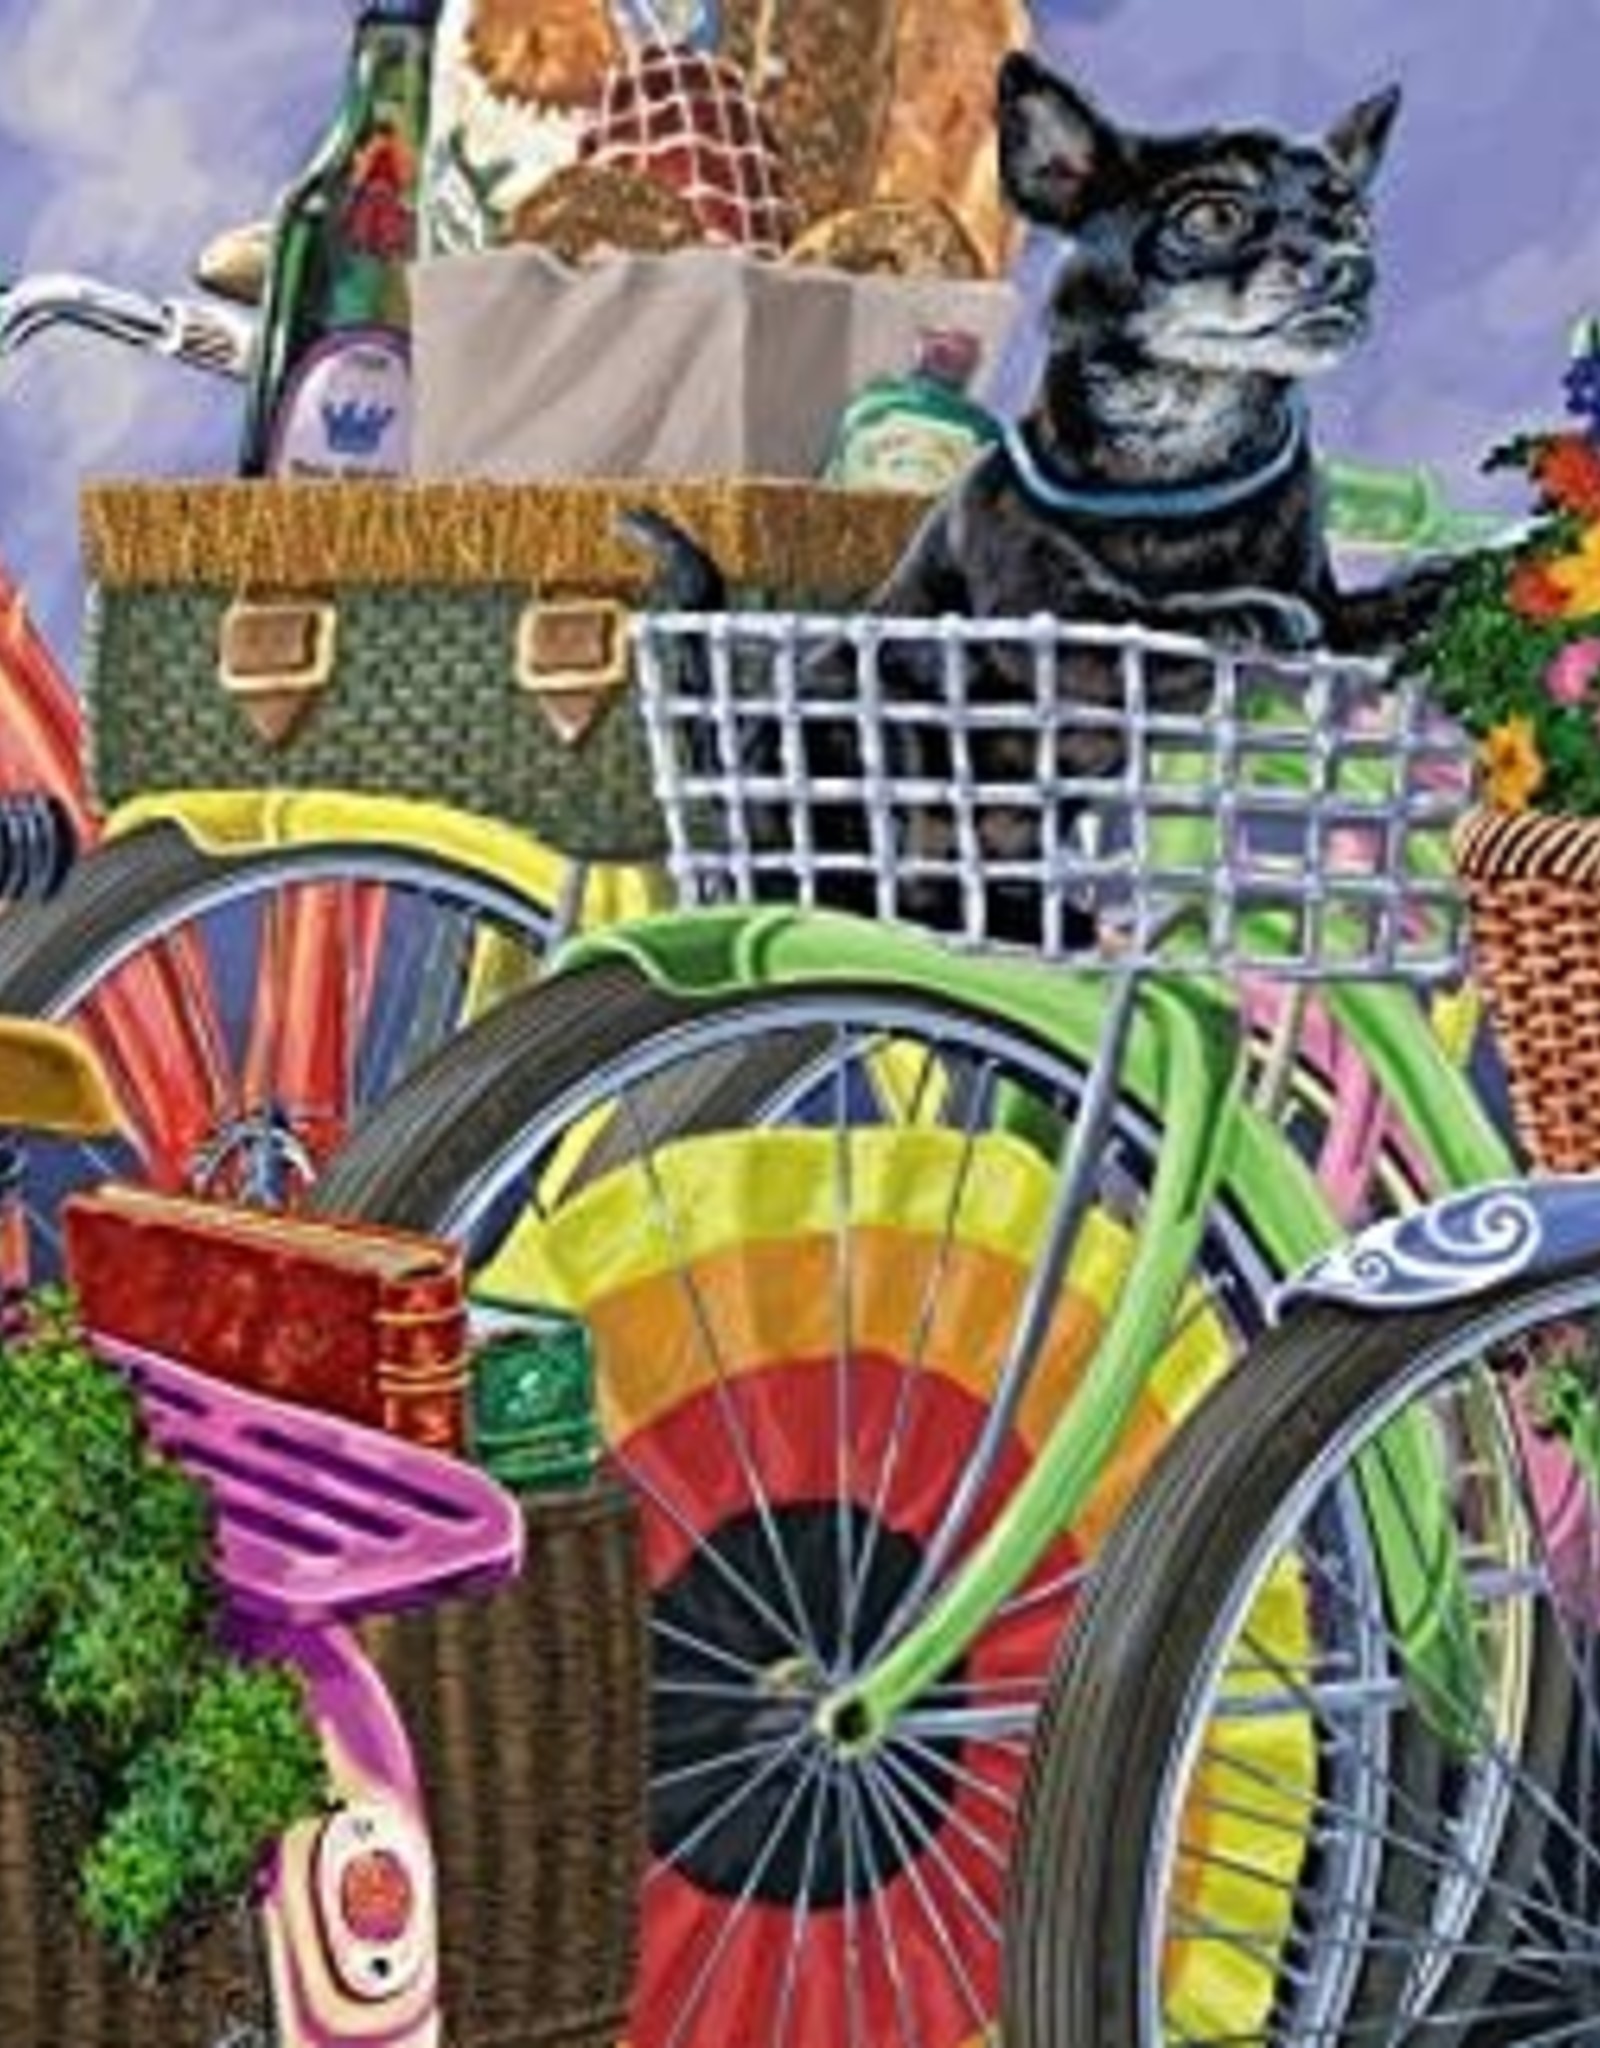 Ravensburger Puzzle 300 pc LF: Bicycle Group large Format